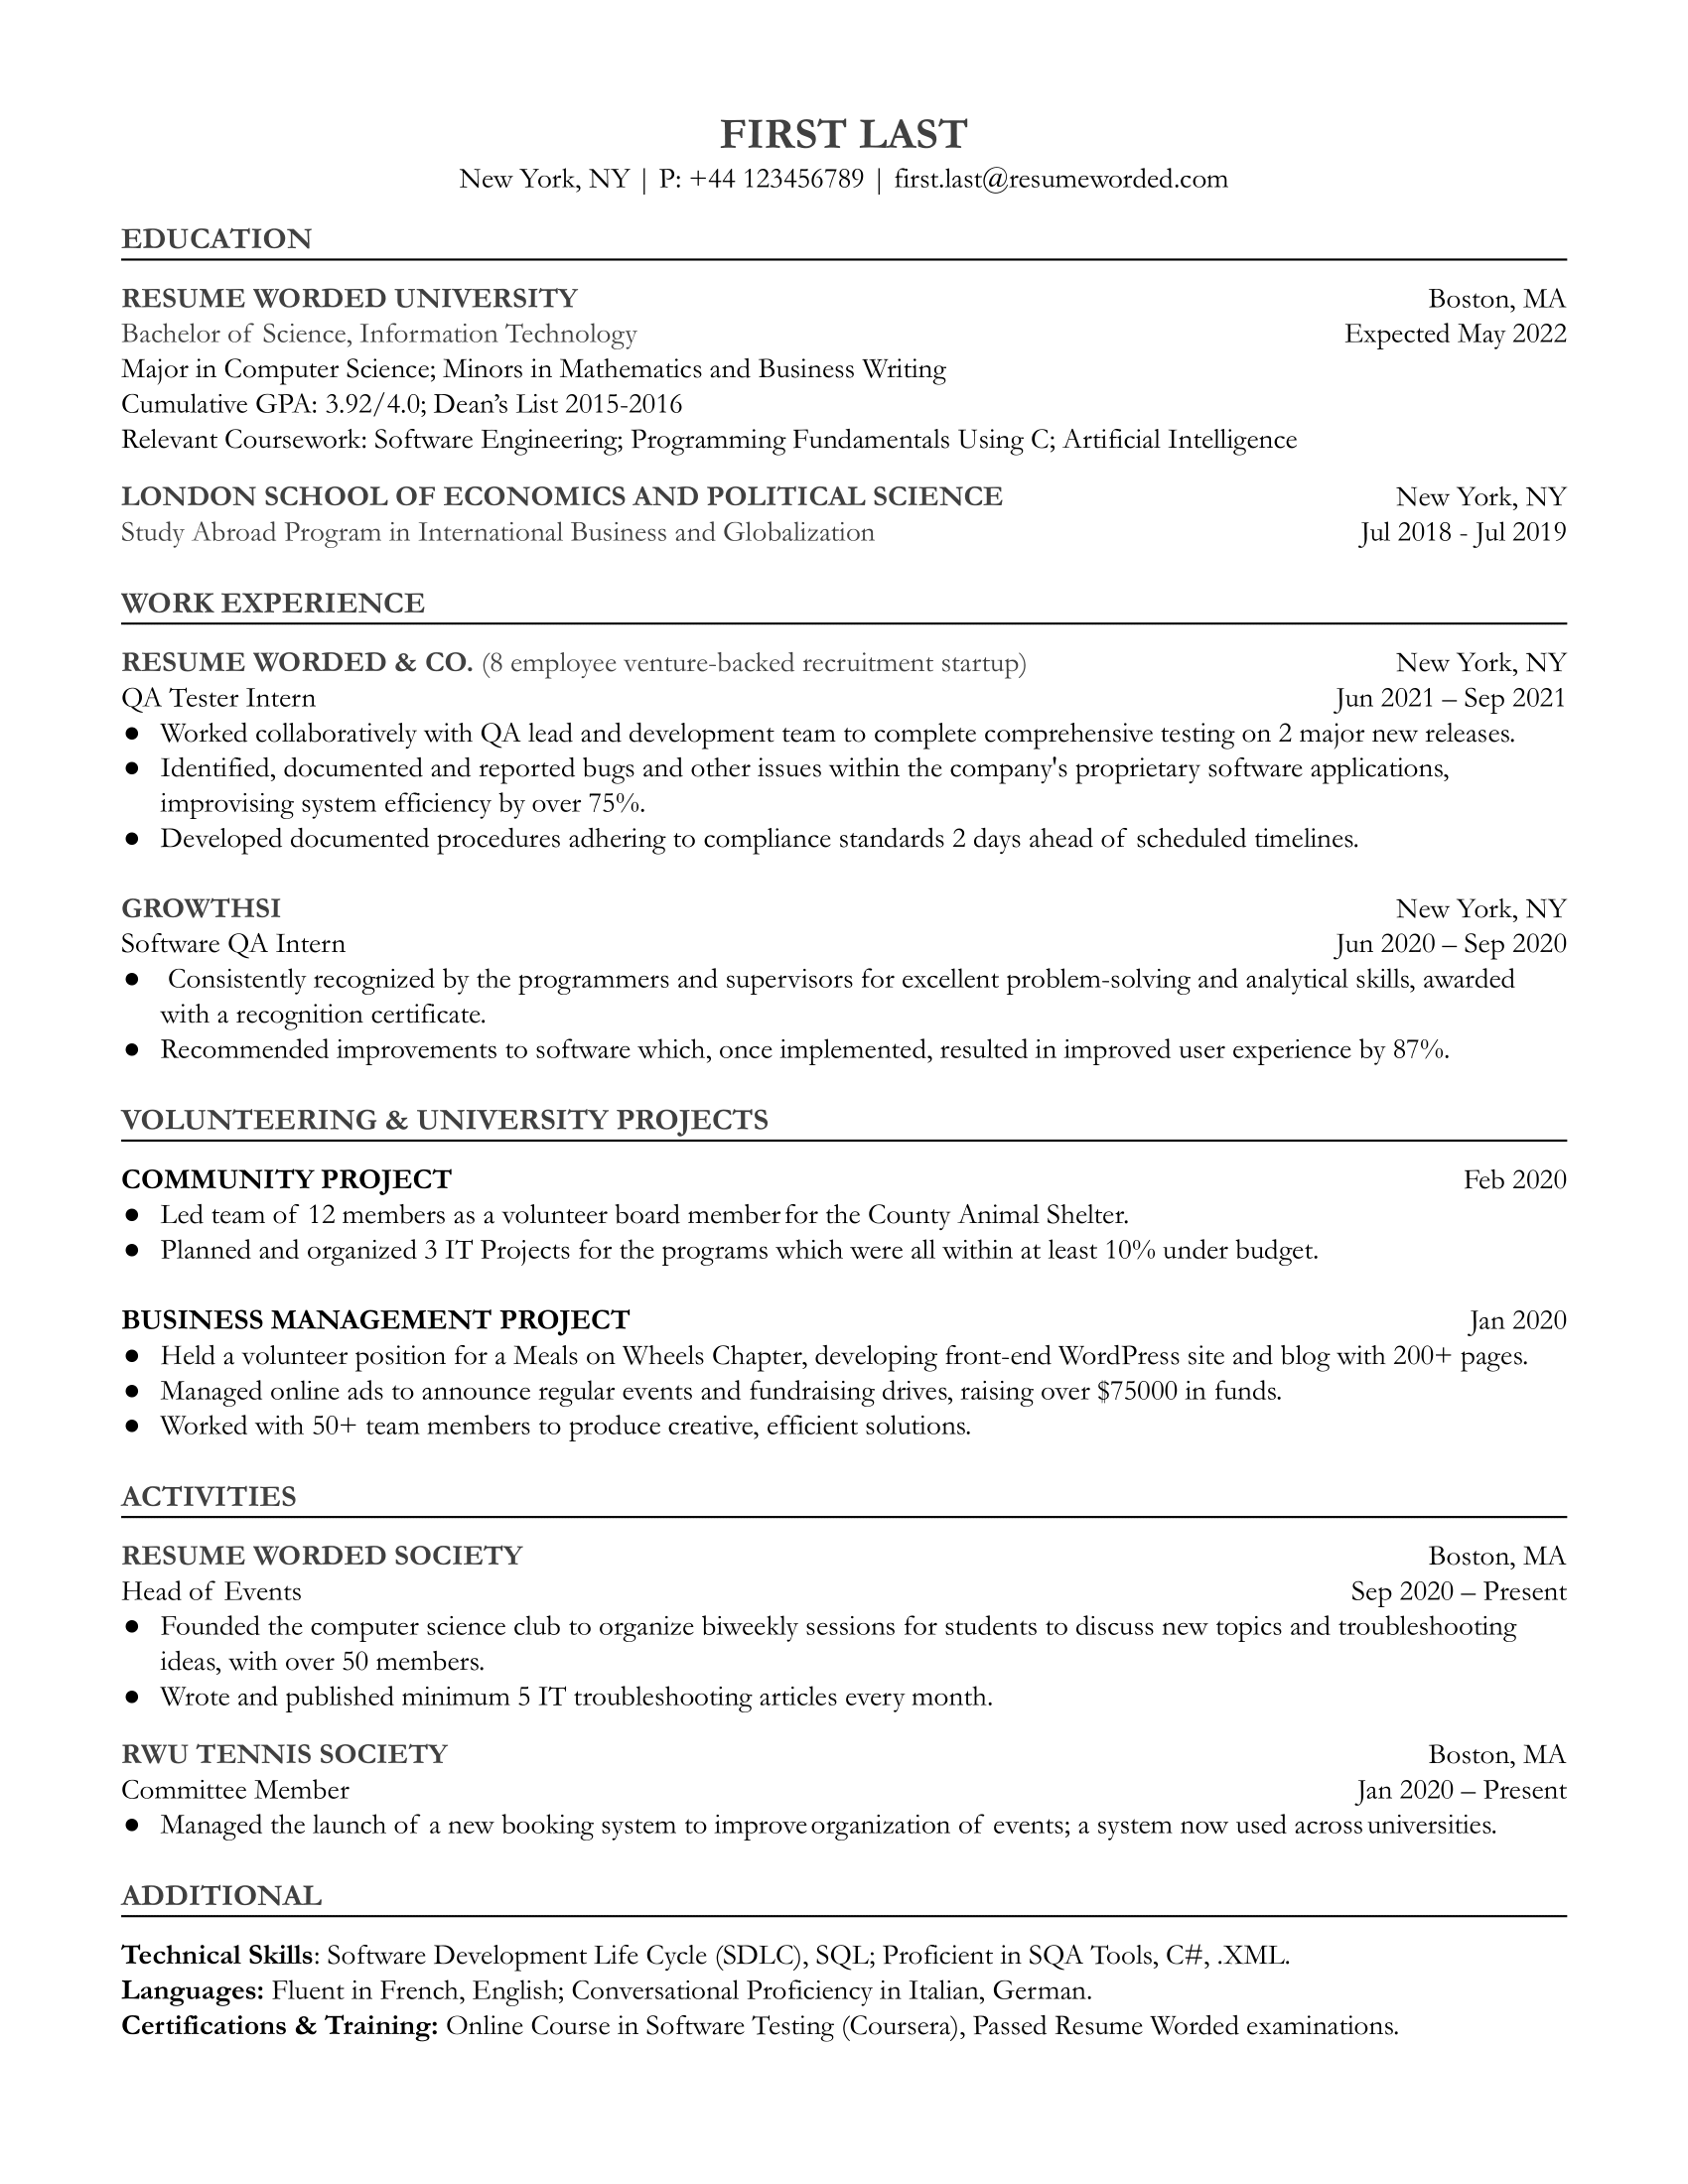 Entry Level QA (Quality Assurance) Tester Resume Template + Example